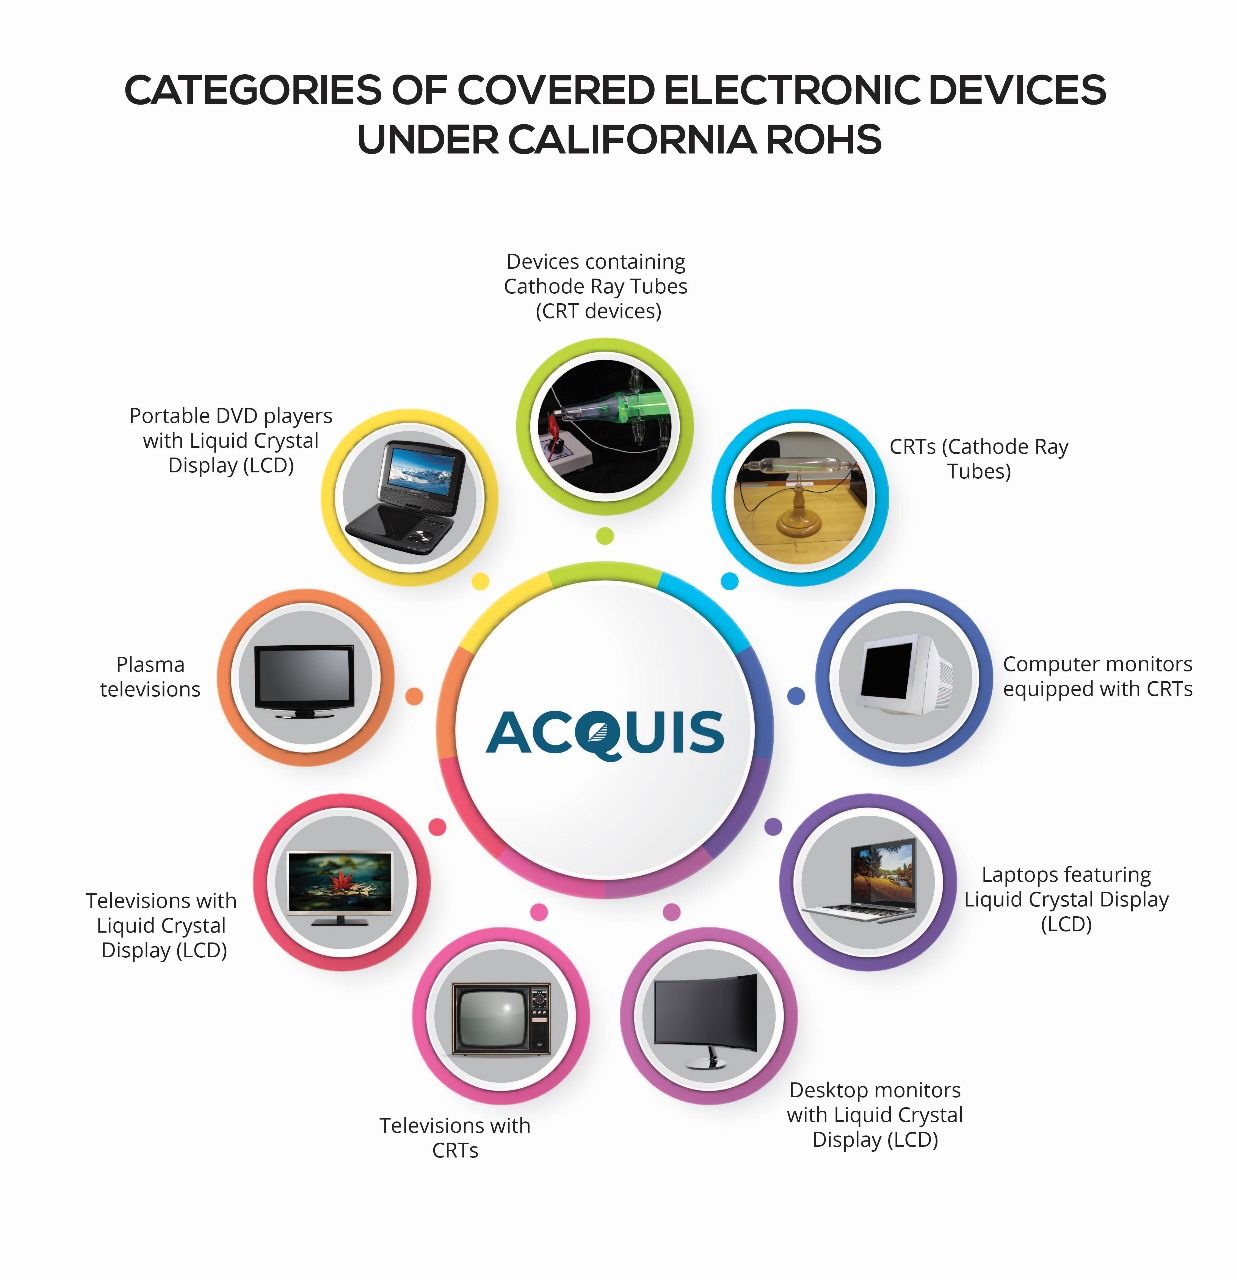 Categories of Covered Electronic Devices Under RoHS.jpg